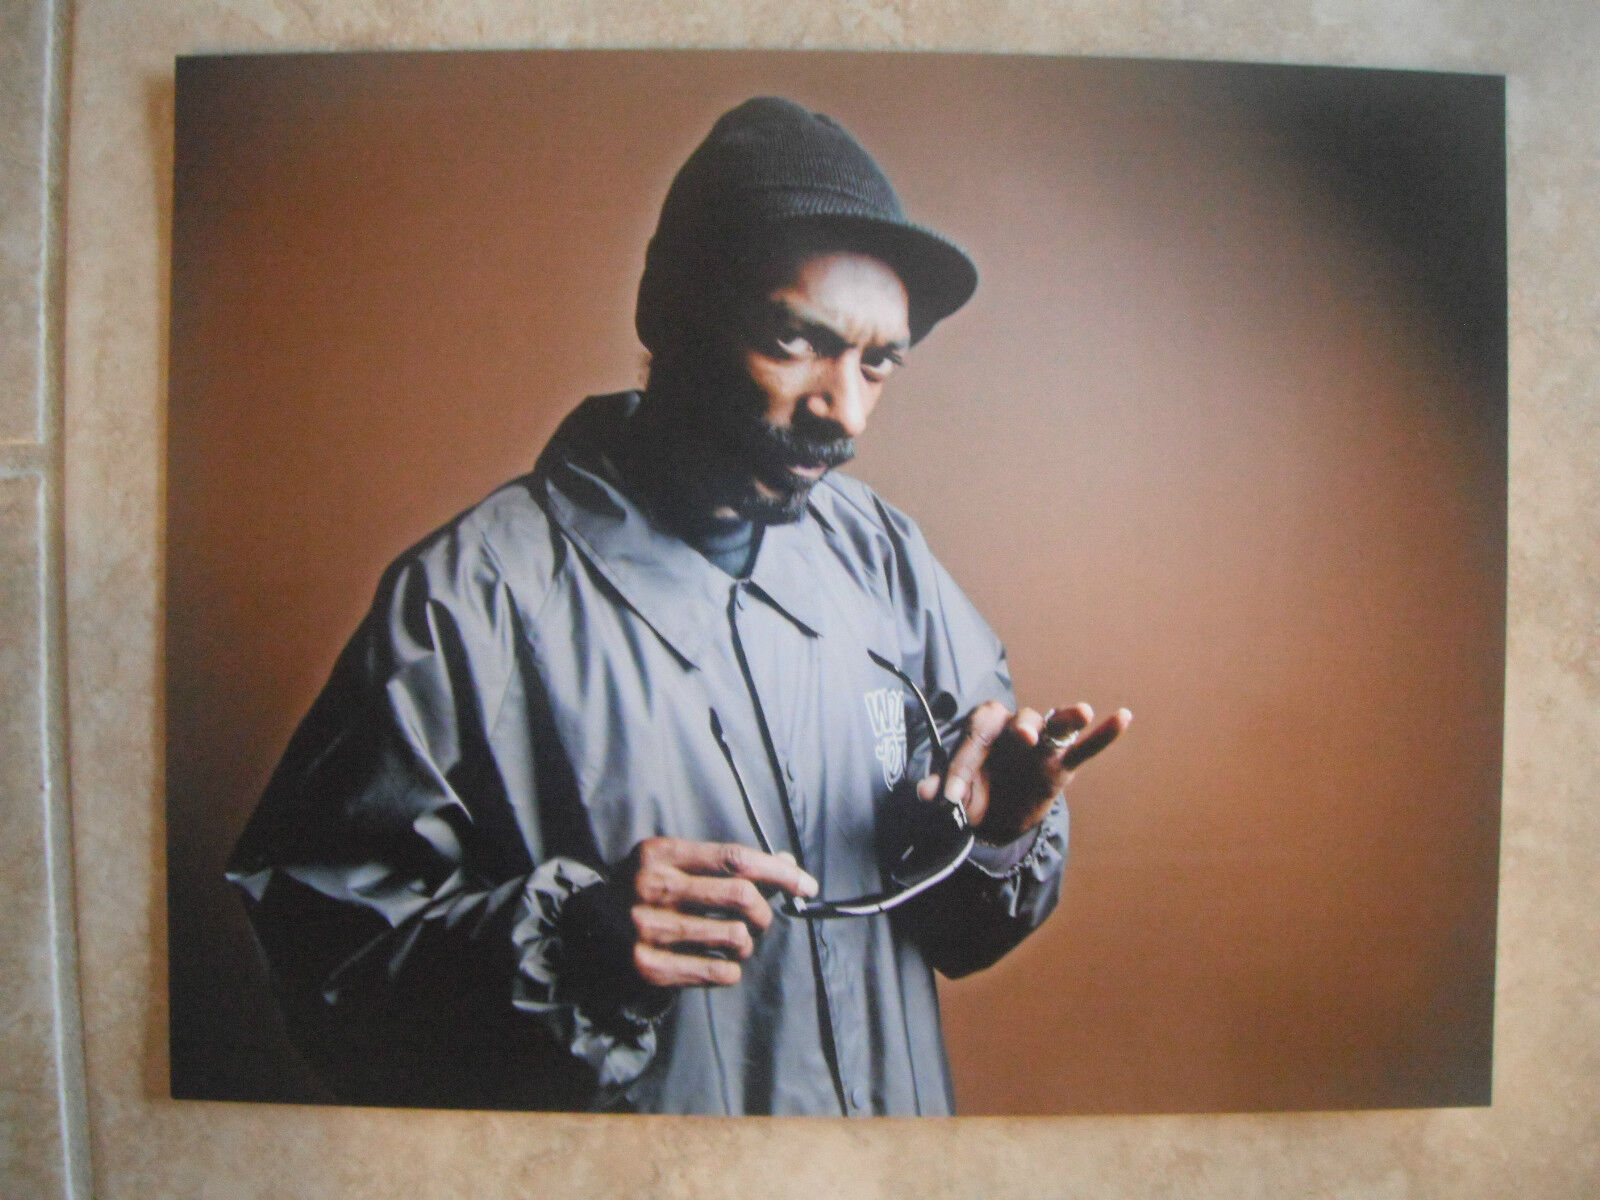 Snoop Dogg Rapper Actor Singer Color 11x14 Promo Photo Poster painting Music #2